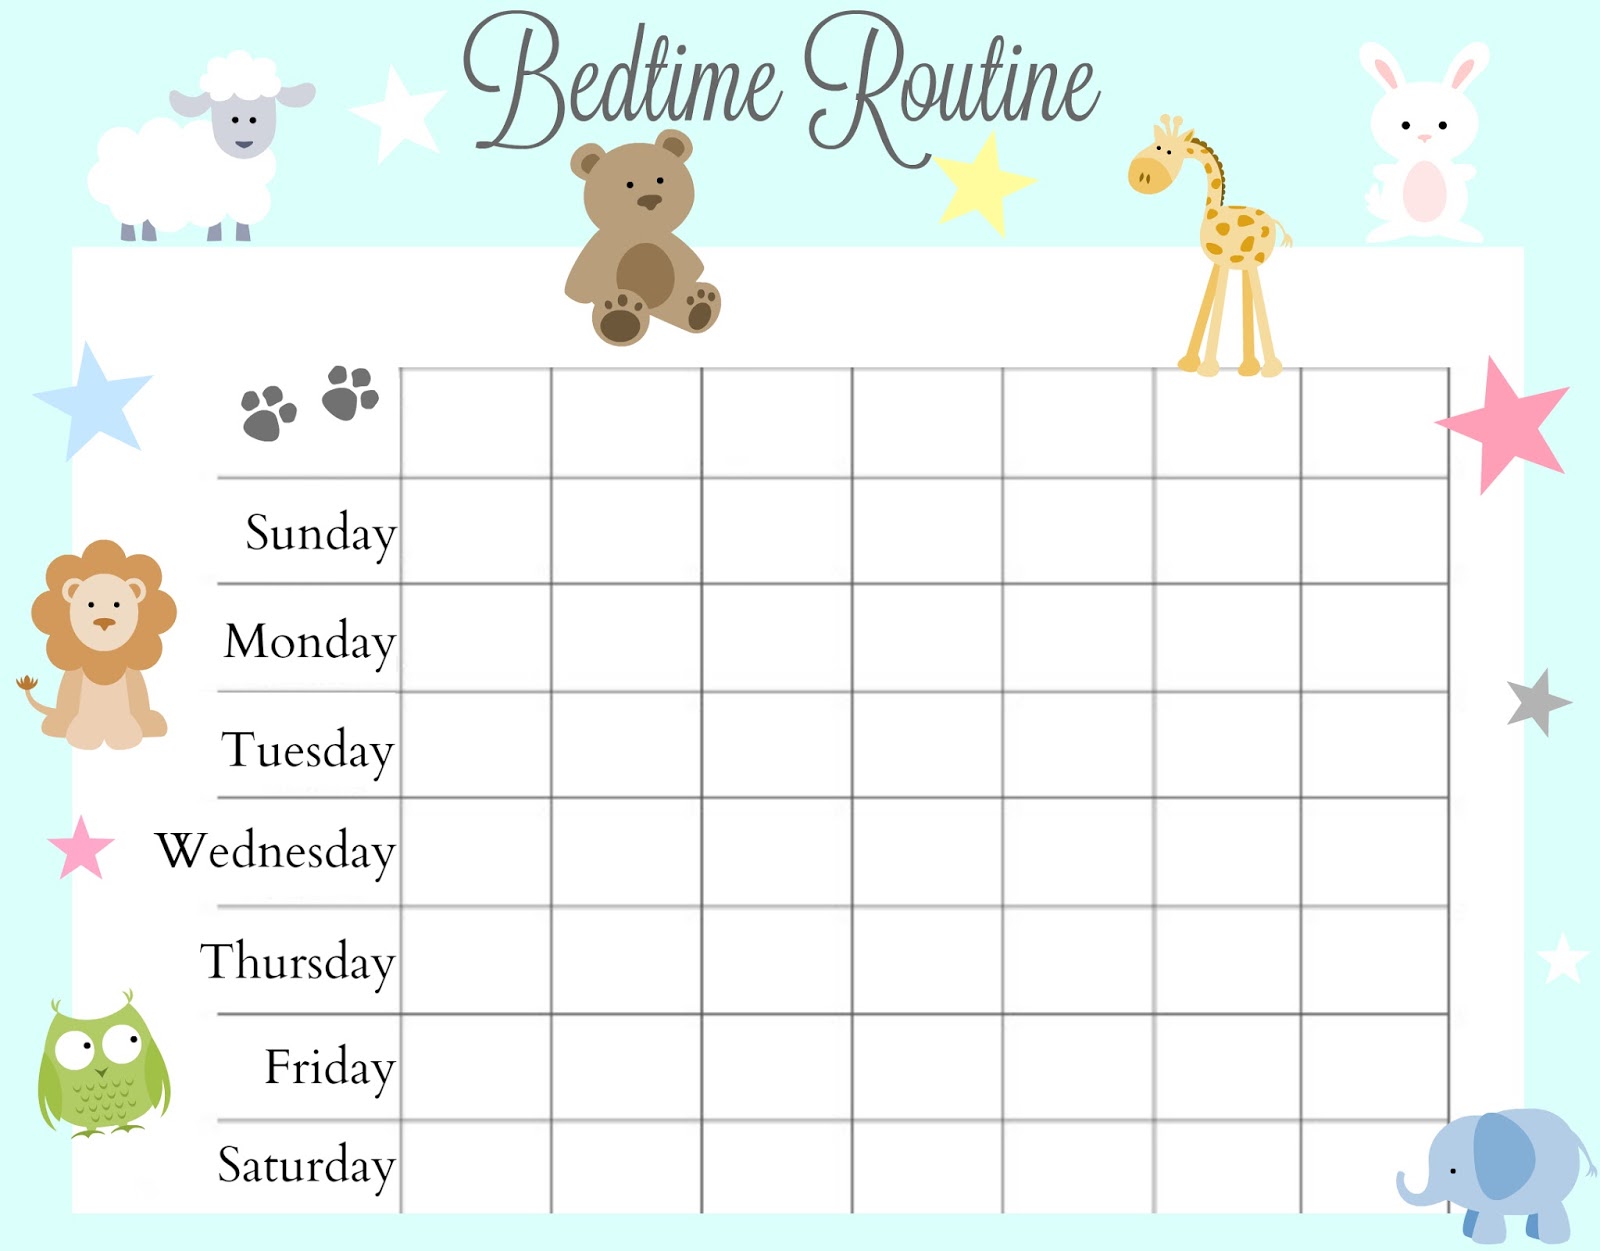 Guide for Effective Bedtime Routine Using Elo Pillow Free Bedtime